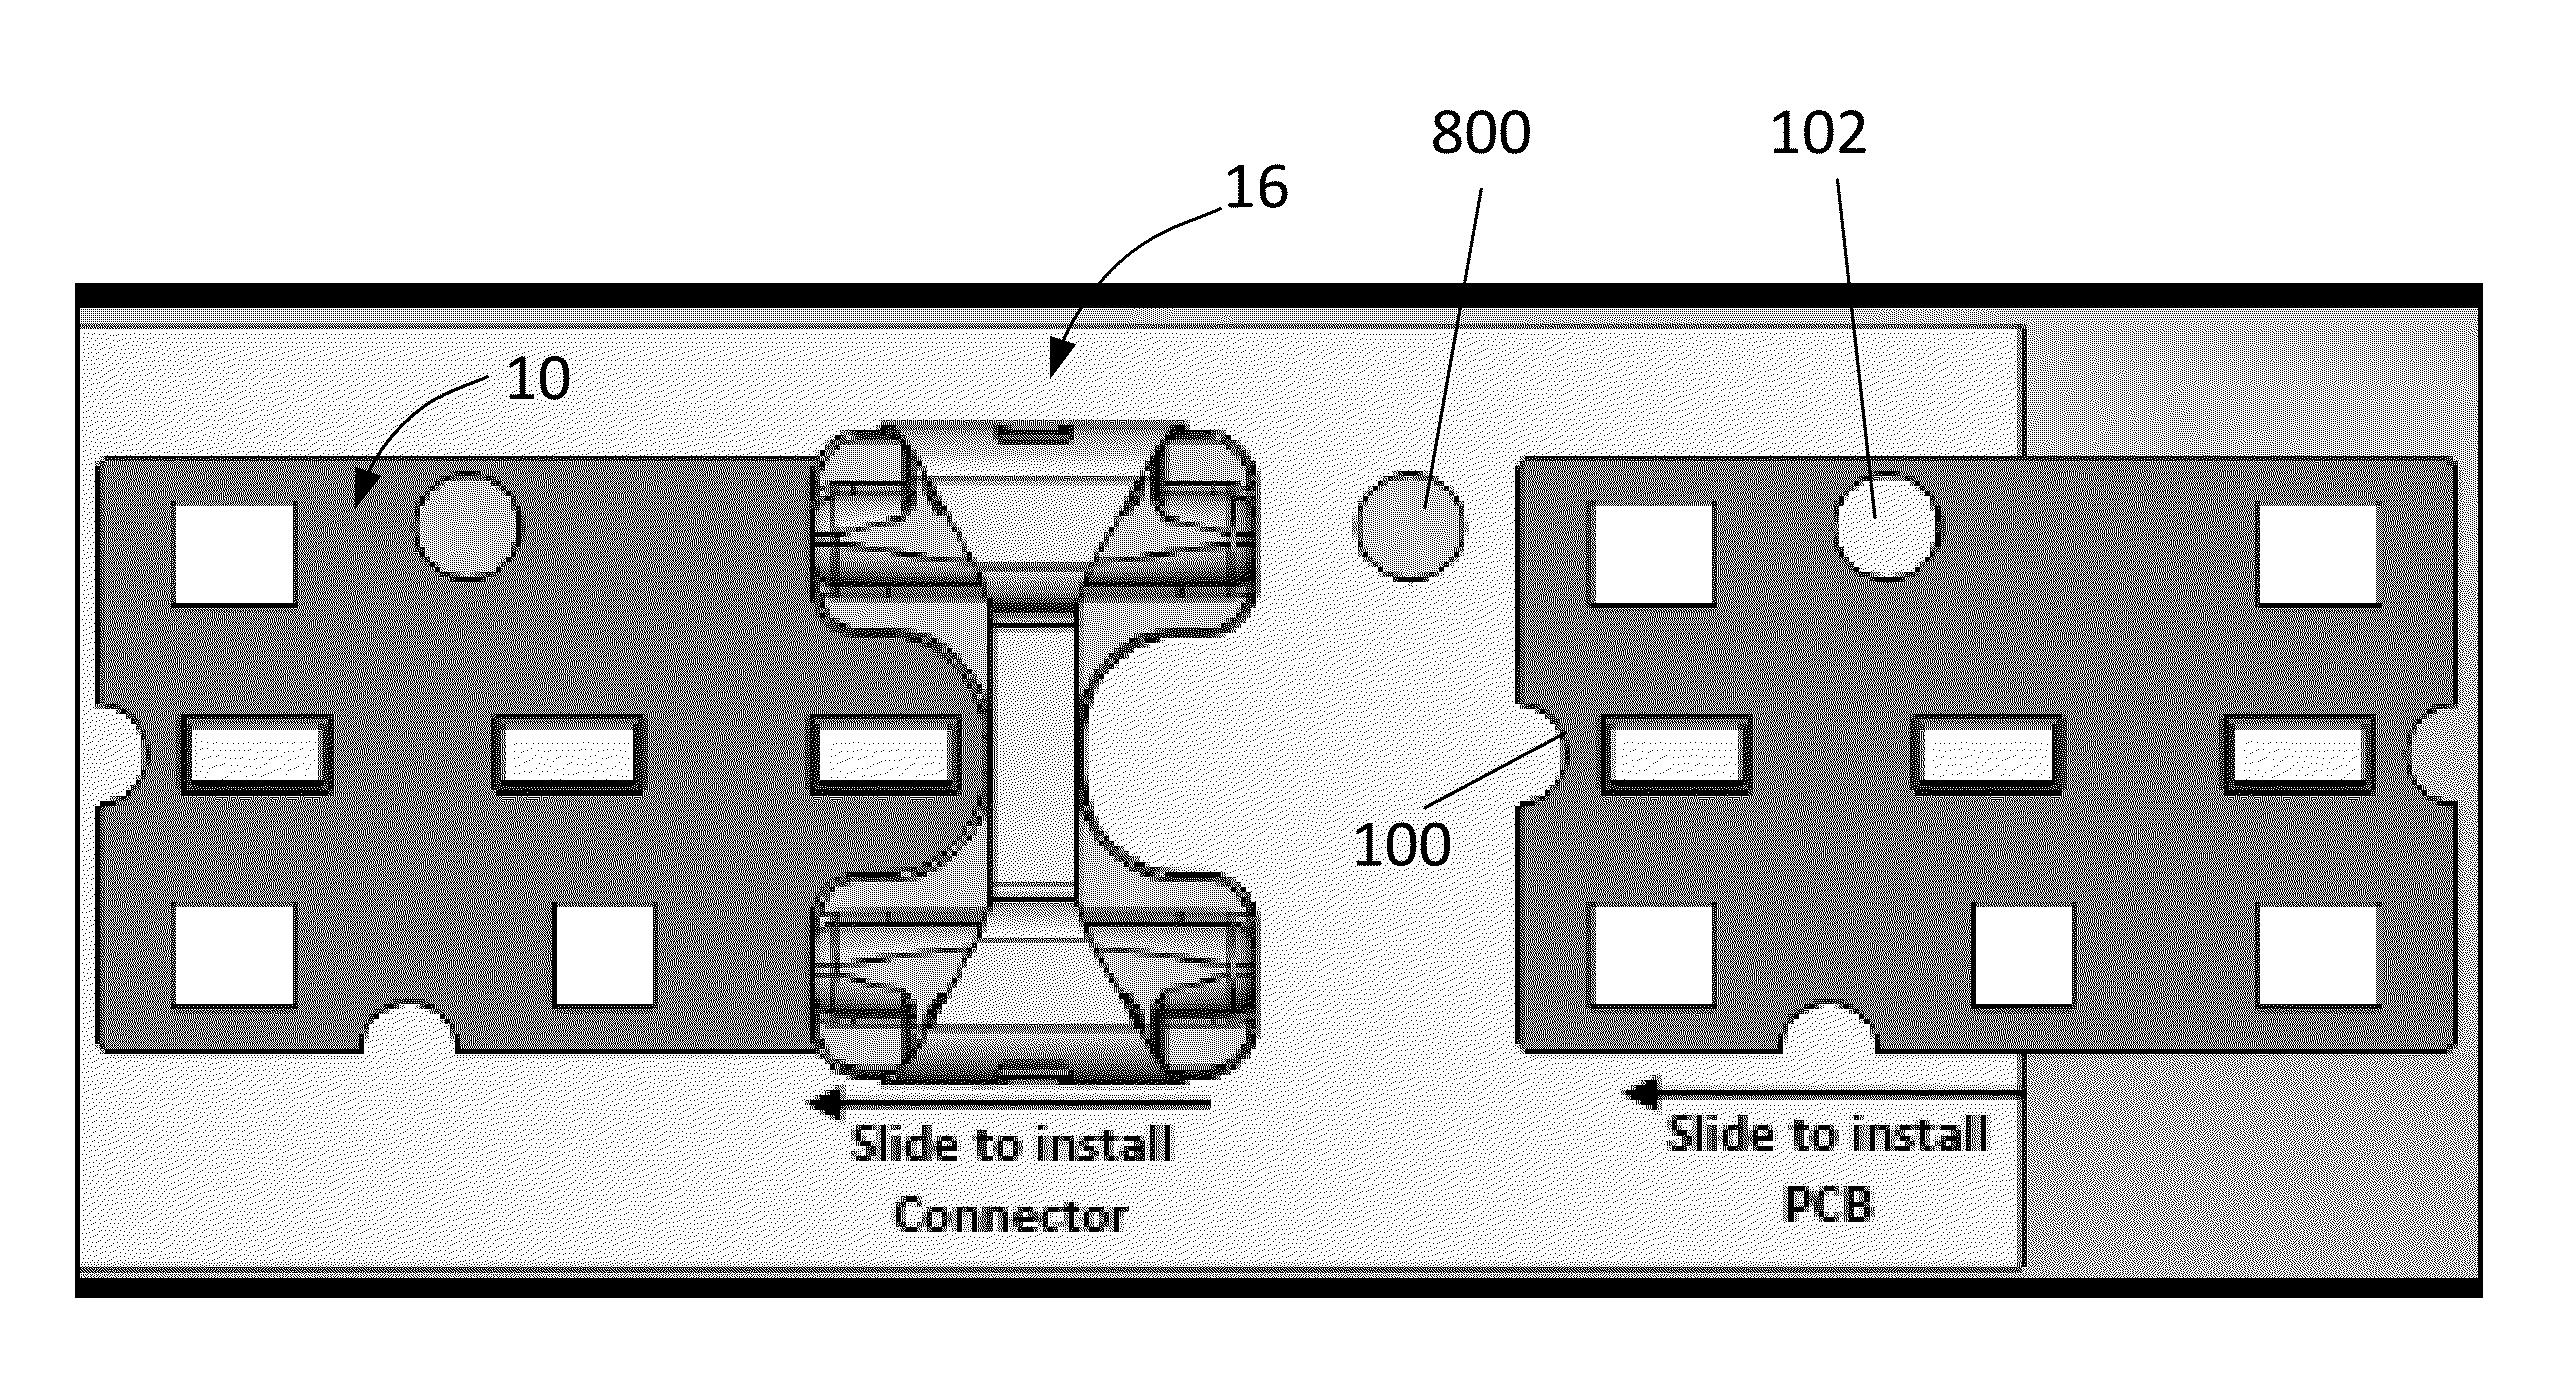 Electrical connector for use with printed circuit boards